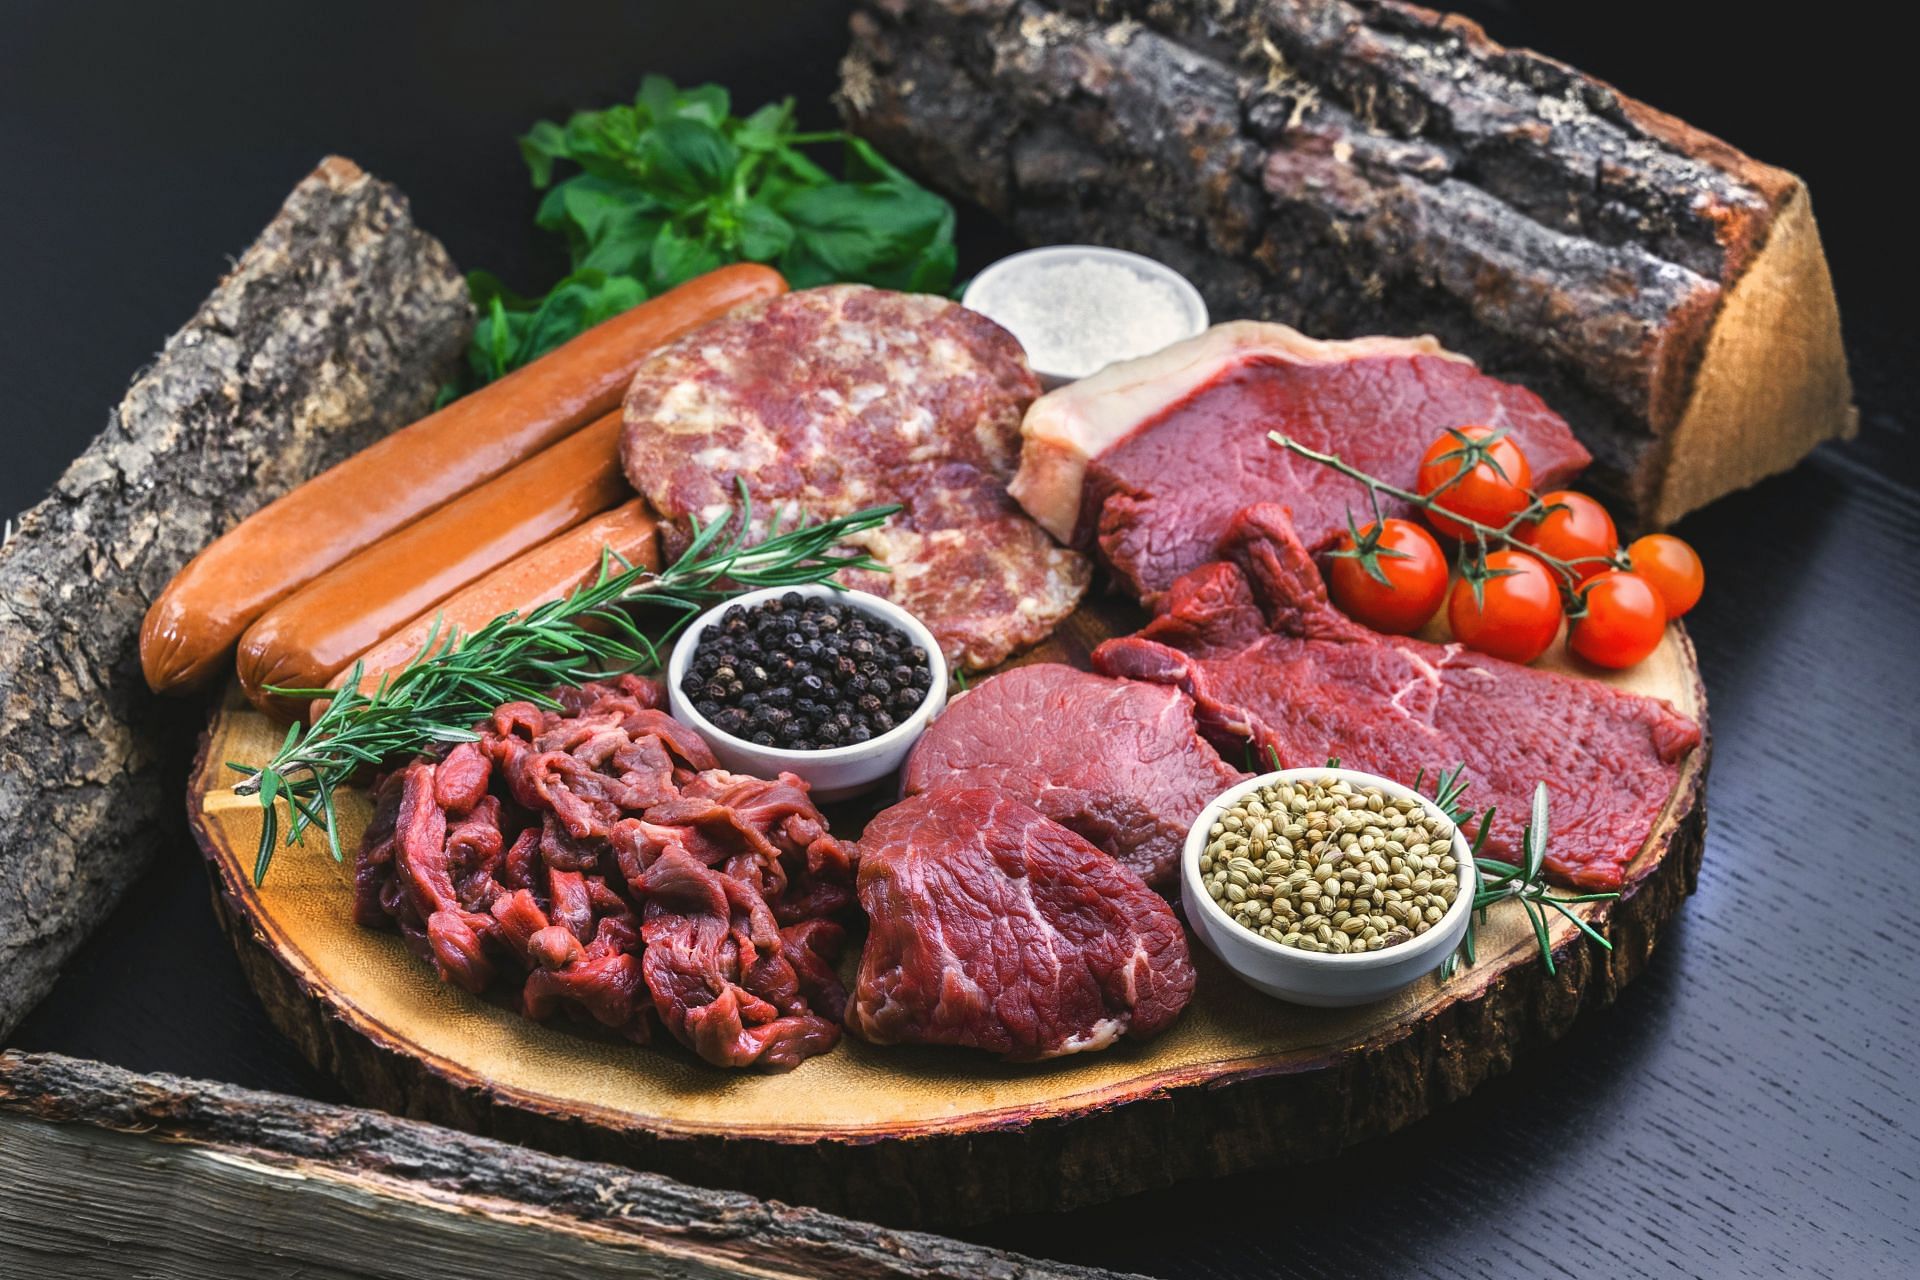 Beef meat and liver are a powerhouse of nutrients. (Image via Unsplash/Eiliv Aceron)